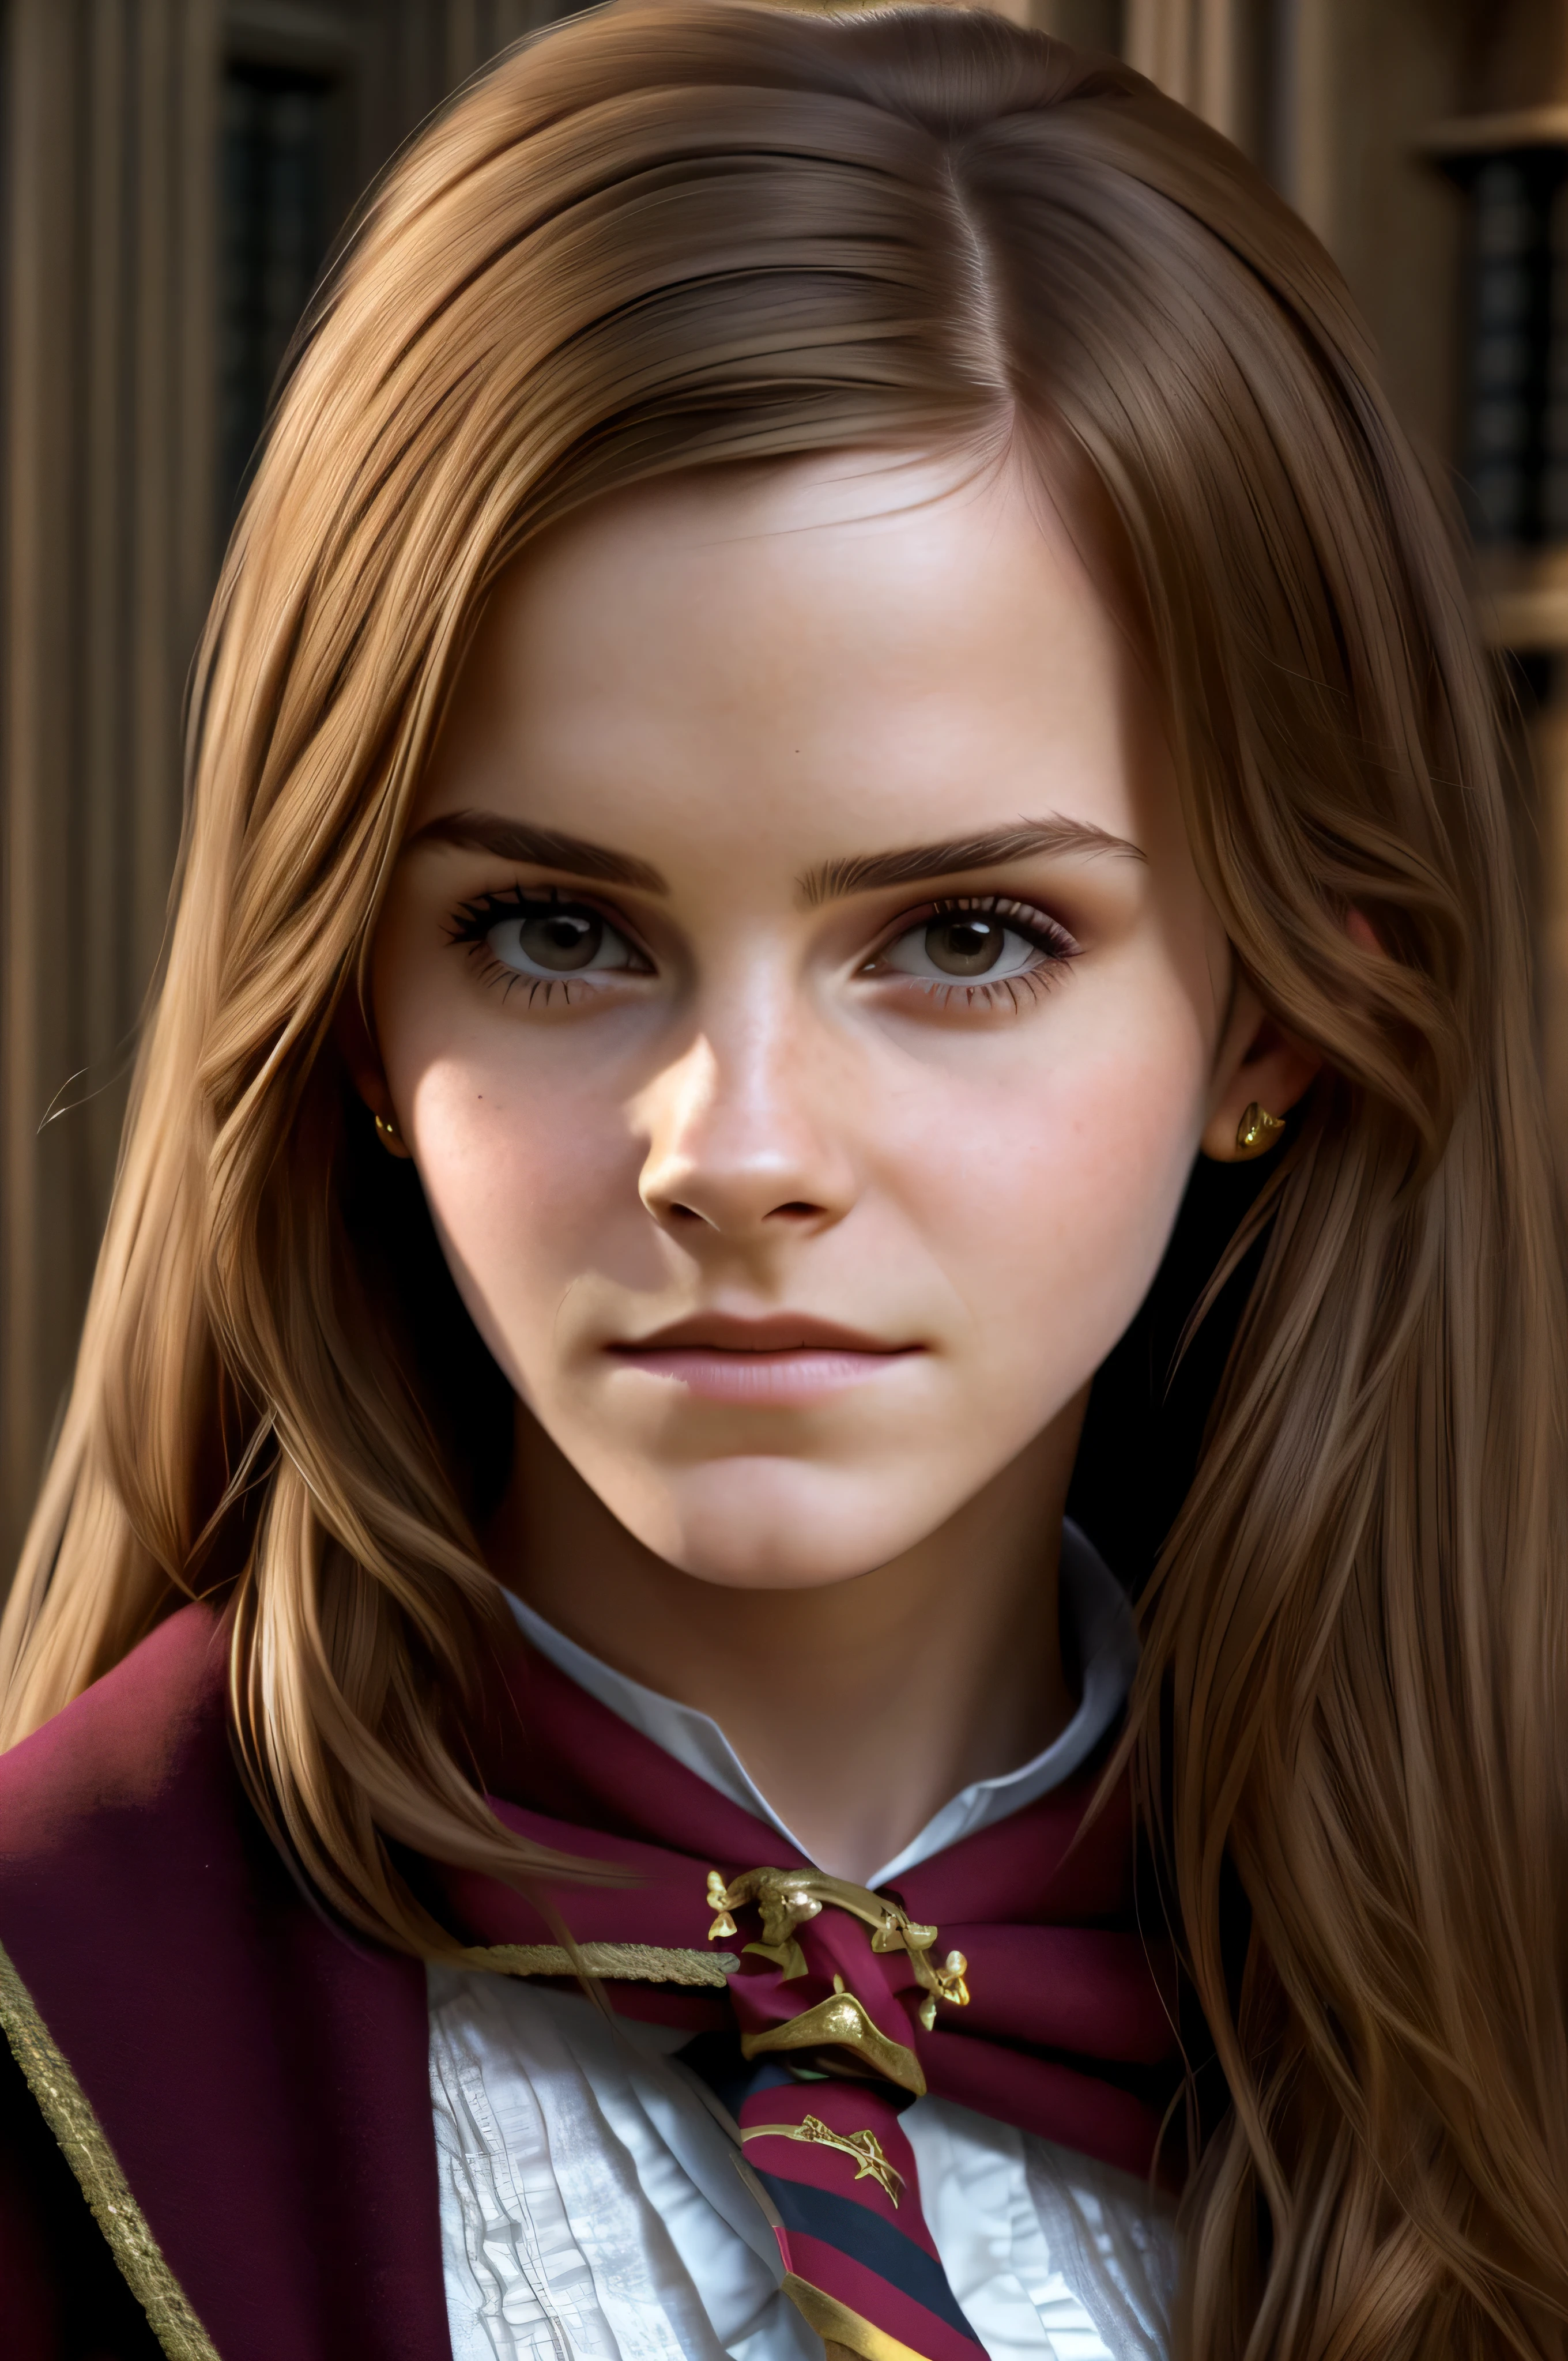 "(First person, Emma Watson, ultra realistic, with wrinkles and frown lines, dressed as Hermione in Harry Potter, with masterpiece quality in ultra-detail, header 16k)" -> "(First person:1.5, Emma Watson:1.5, ultra-realistic:1.5, wrinkles:1.5, expression lines:1.5, dressed as Hermione in Harry Potter, masterpiece, ultra-detail, header 16k)"